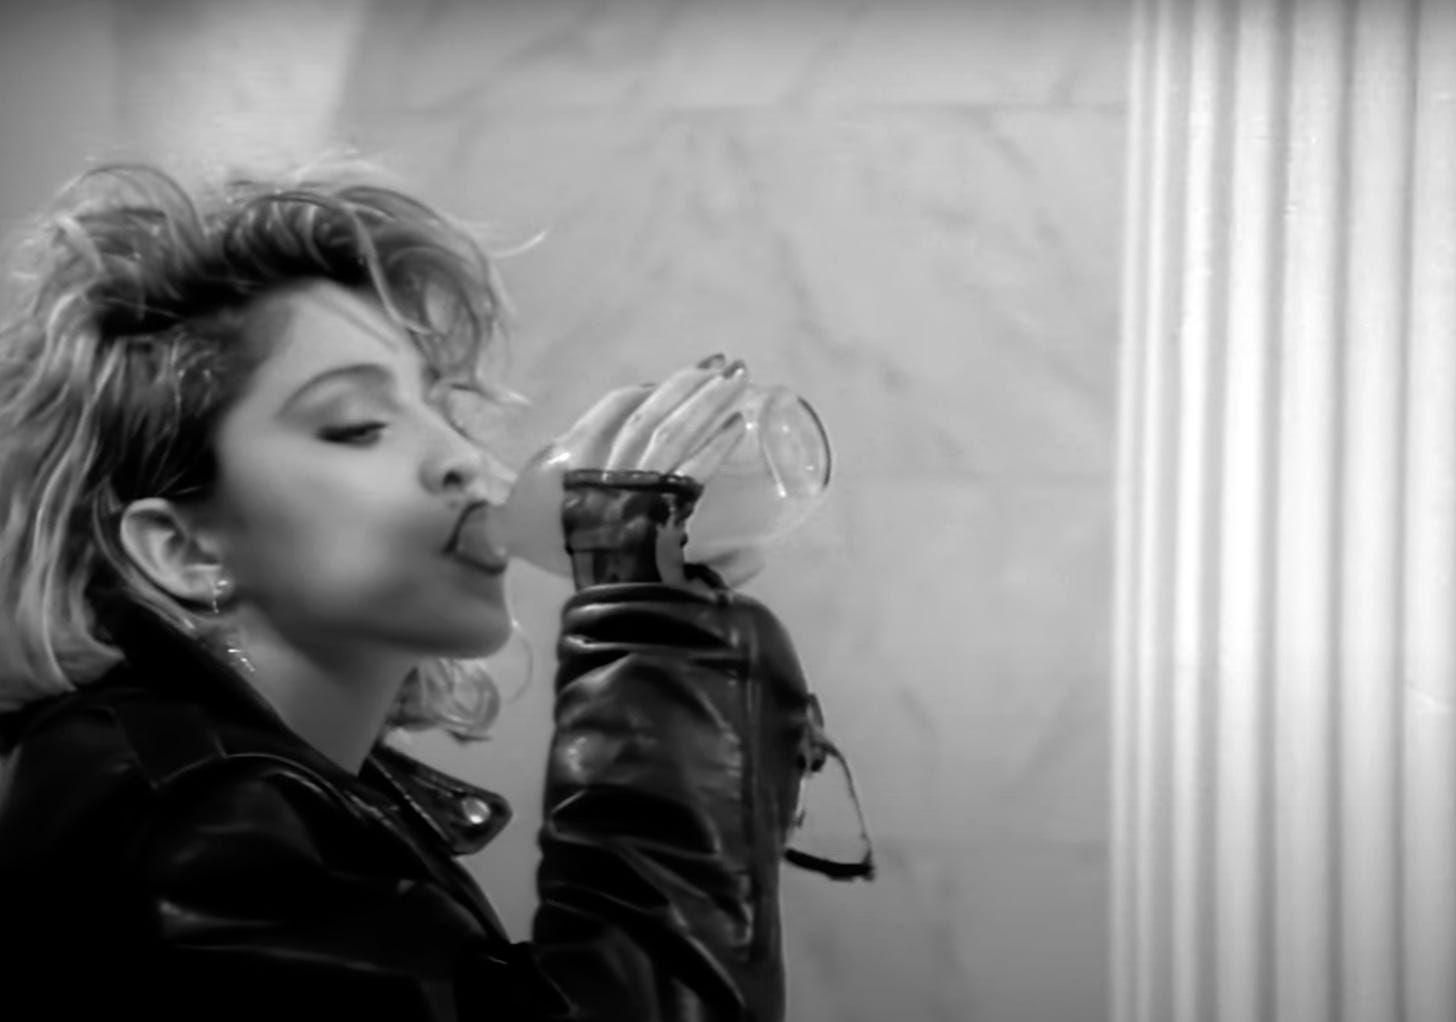 Still from the Borderline video featuring Madonna drinking from a bottle 